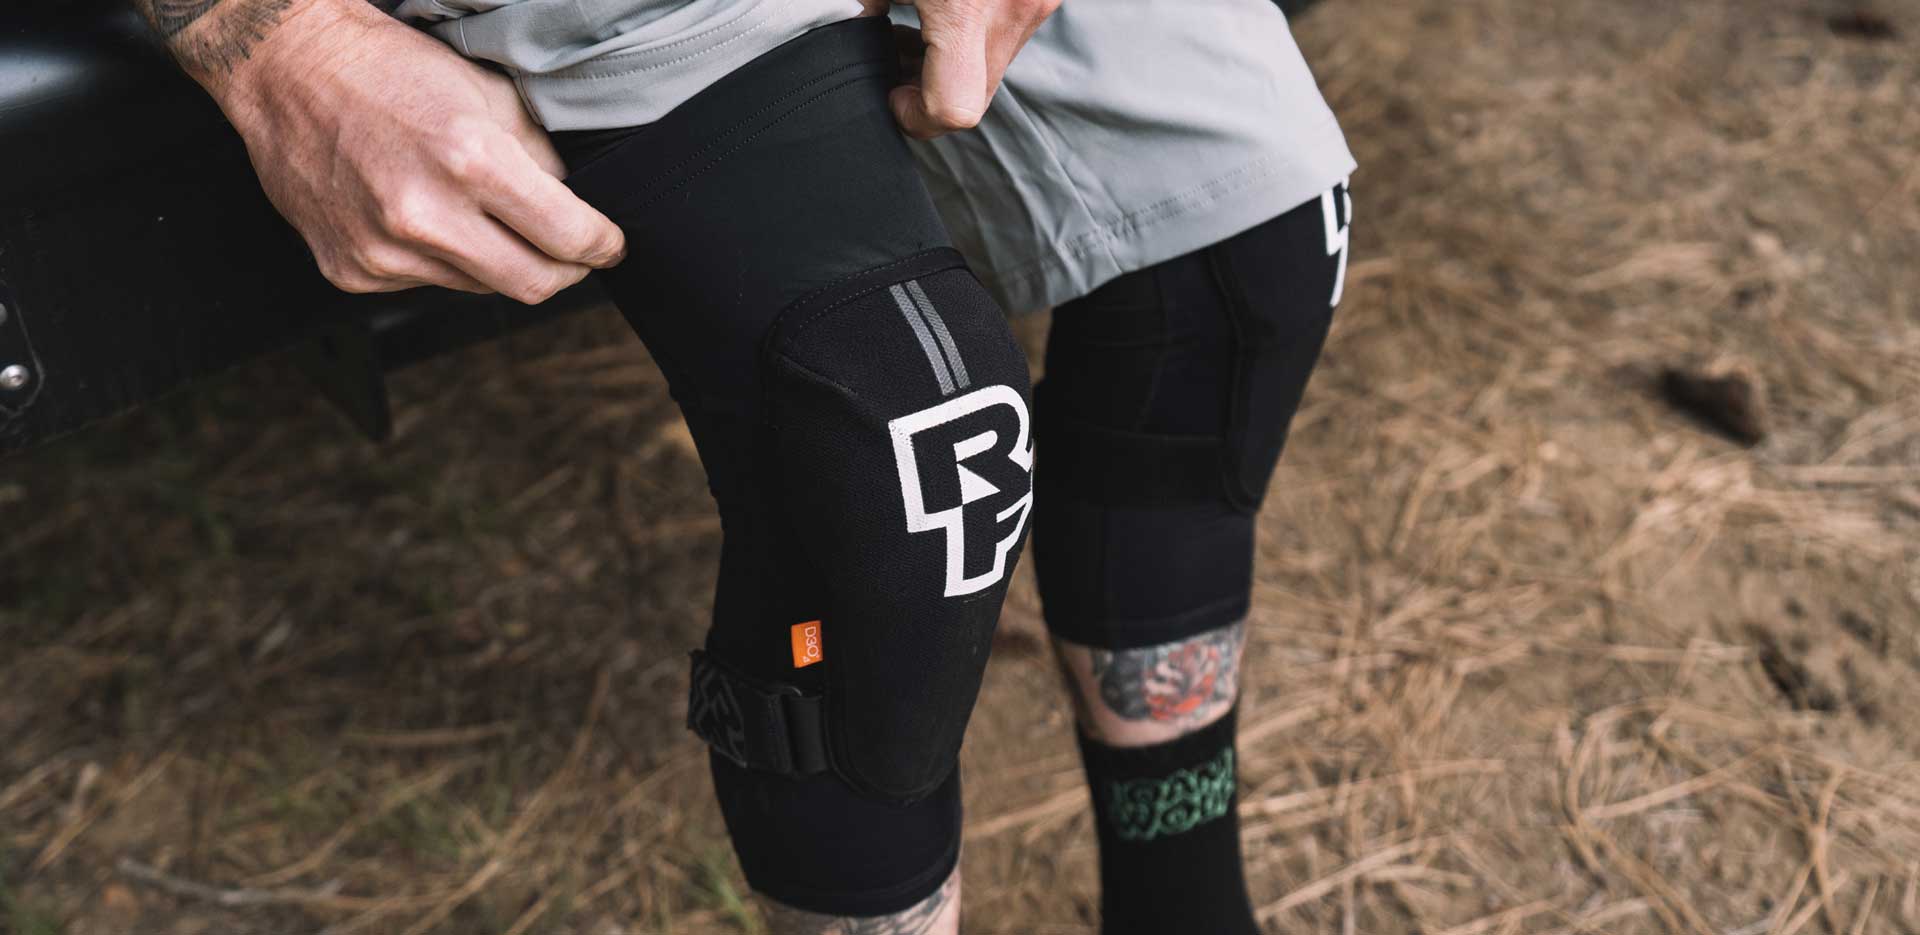 Race Face Indy Knee Pad Review